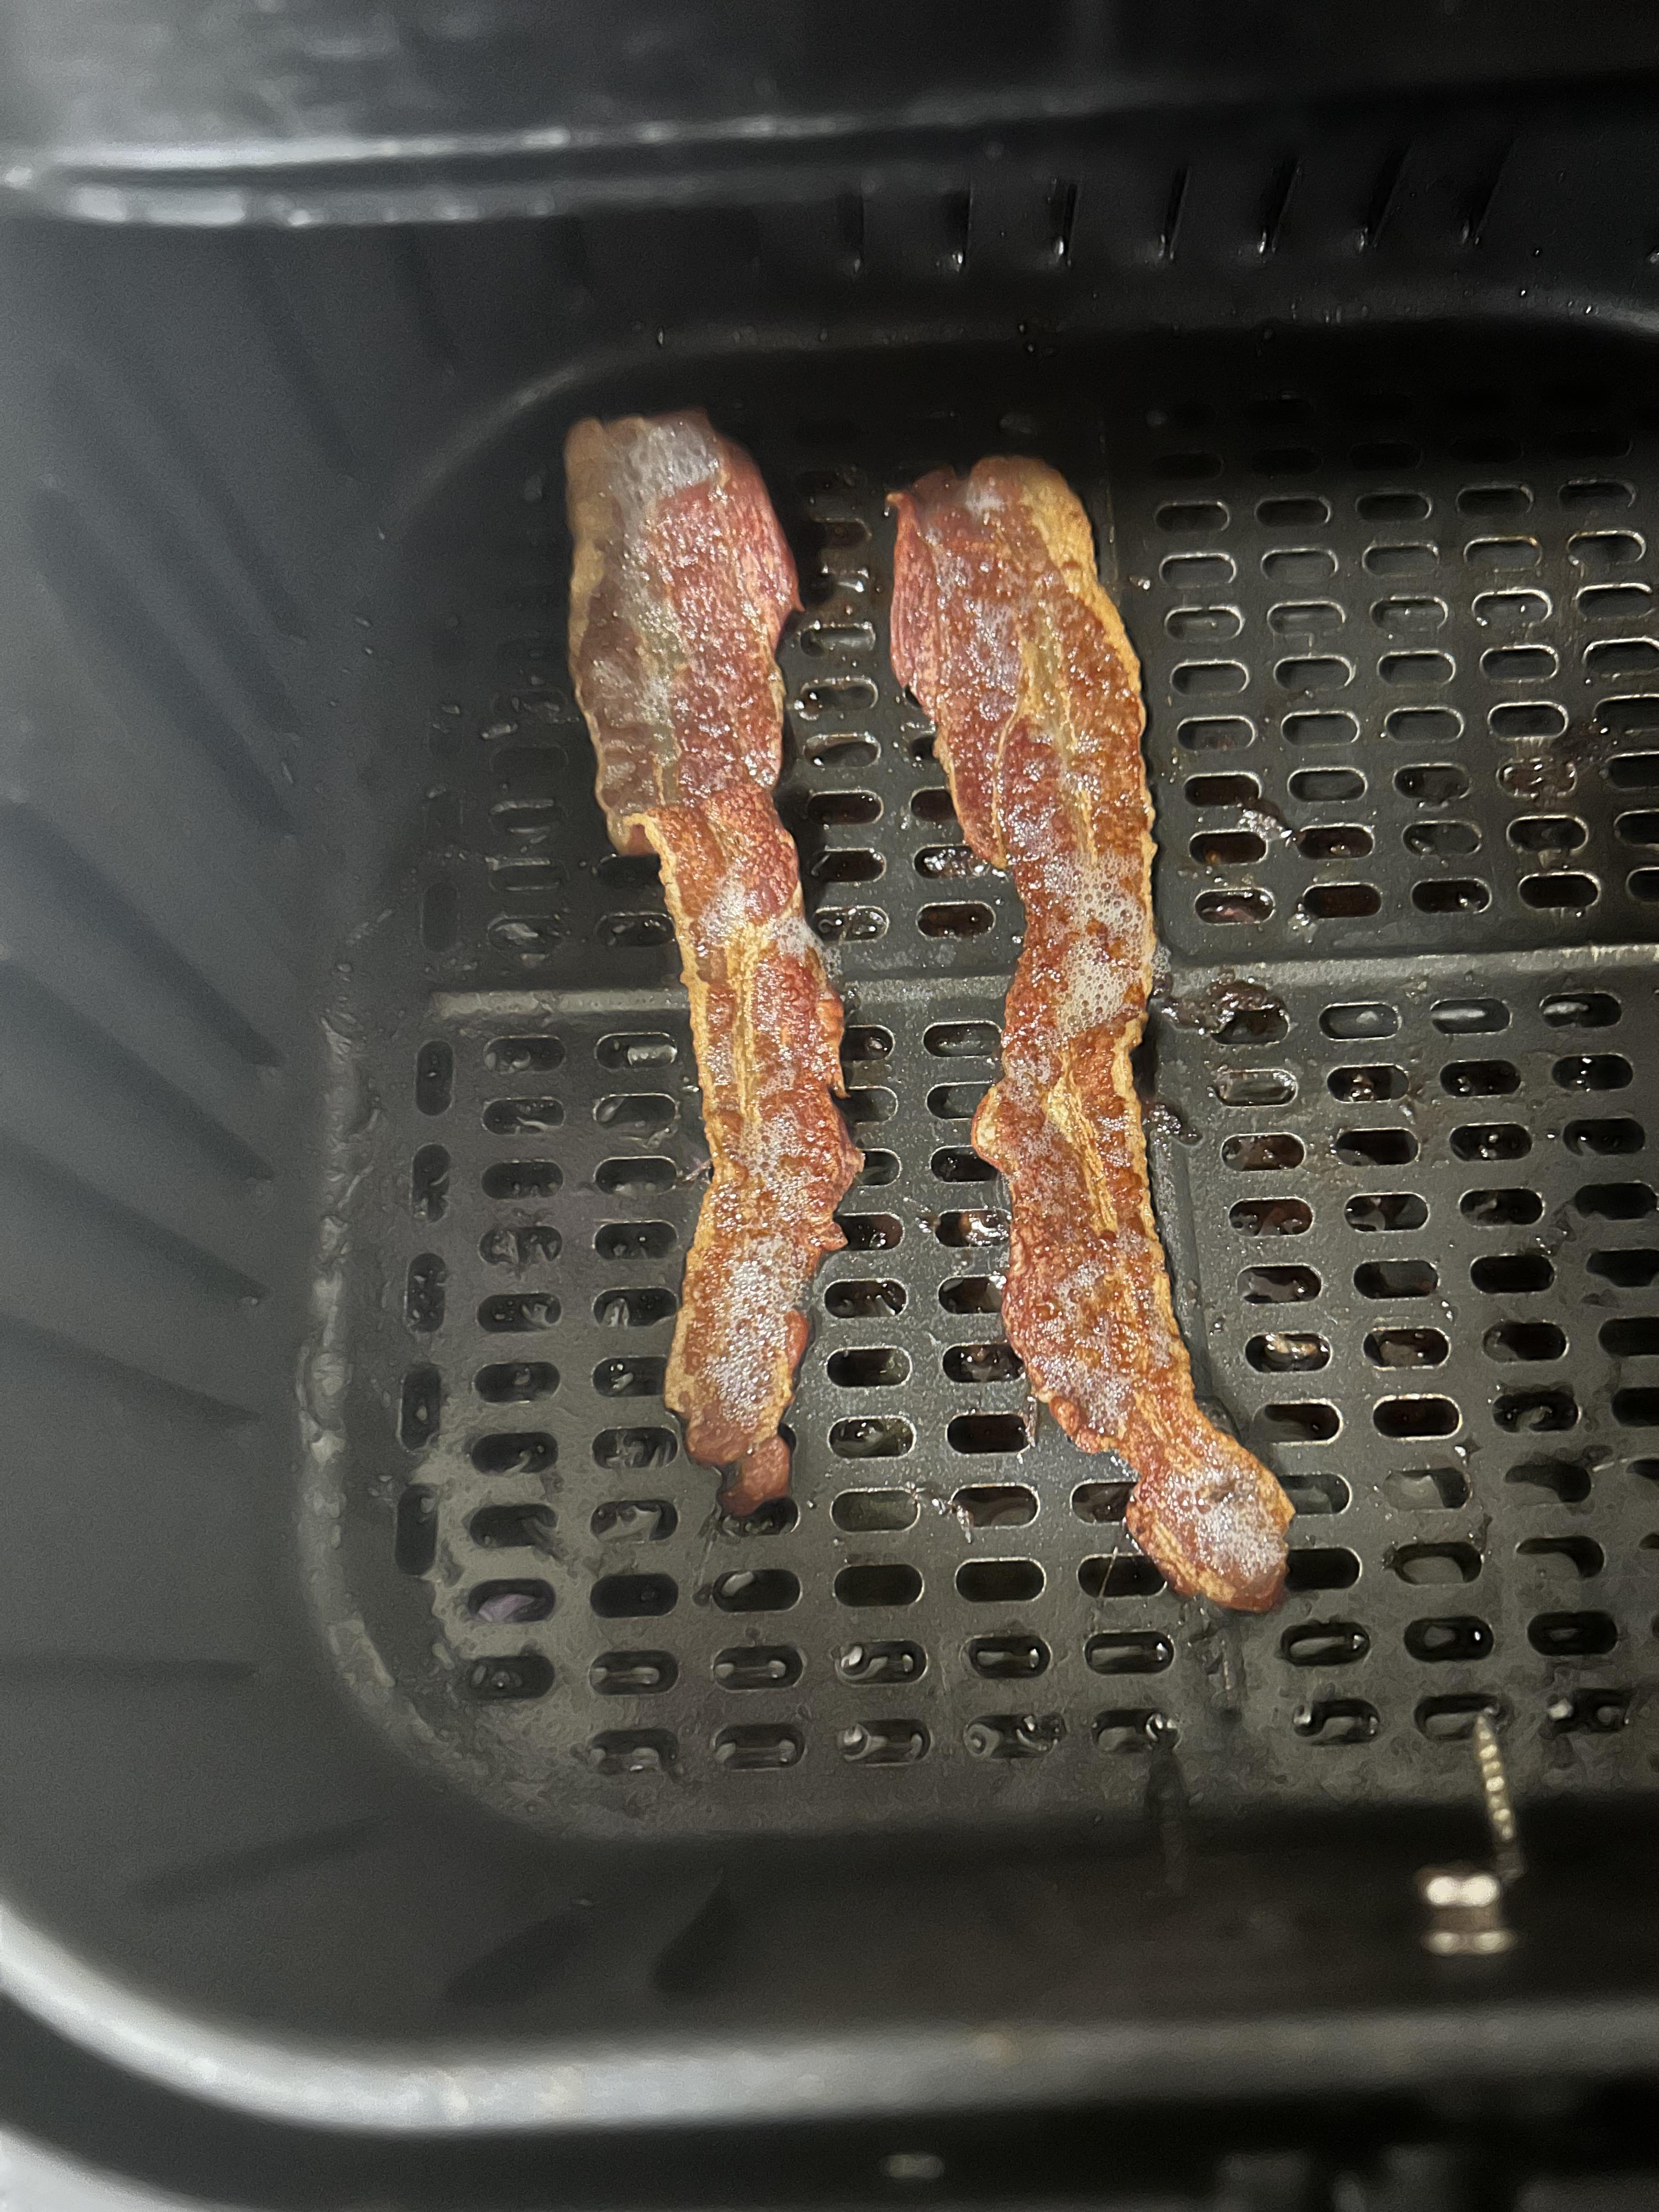 cooked bacon.jpg